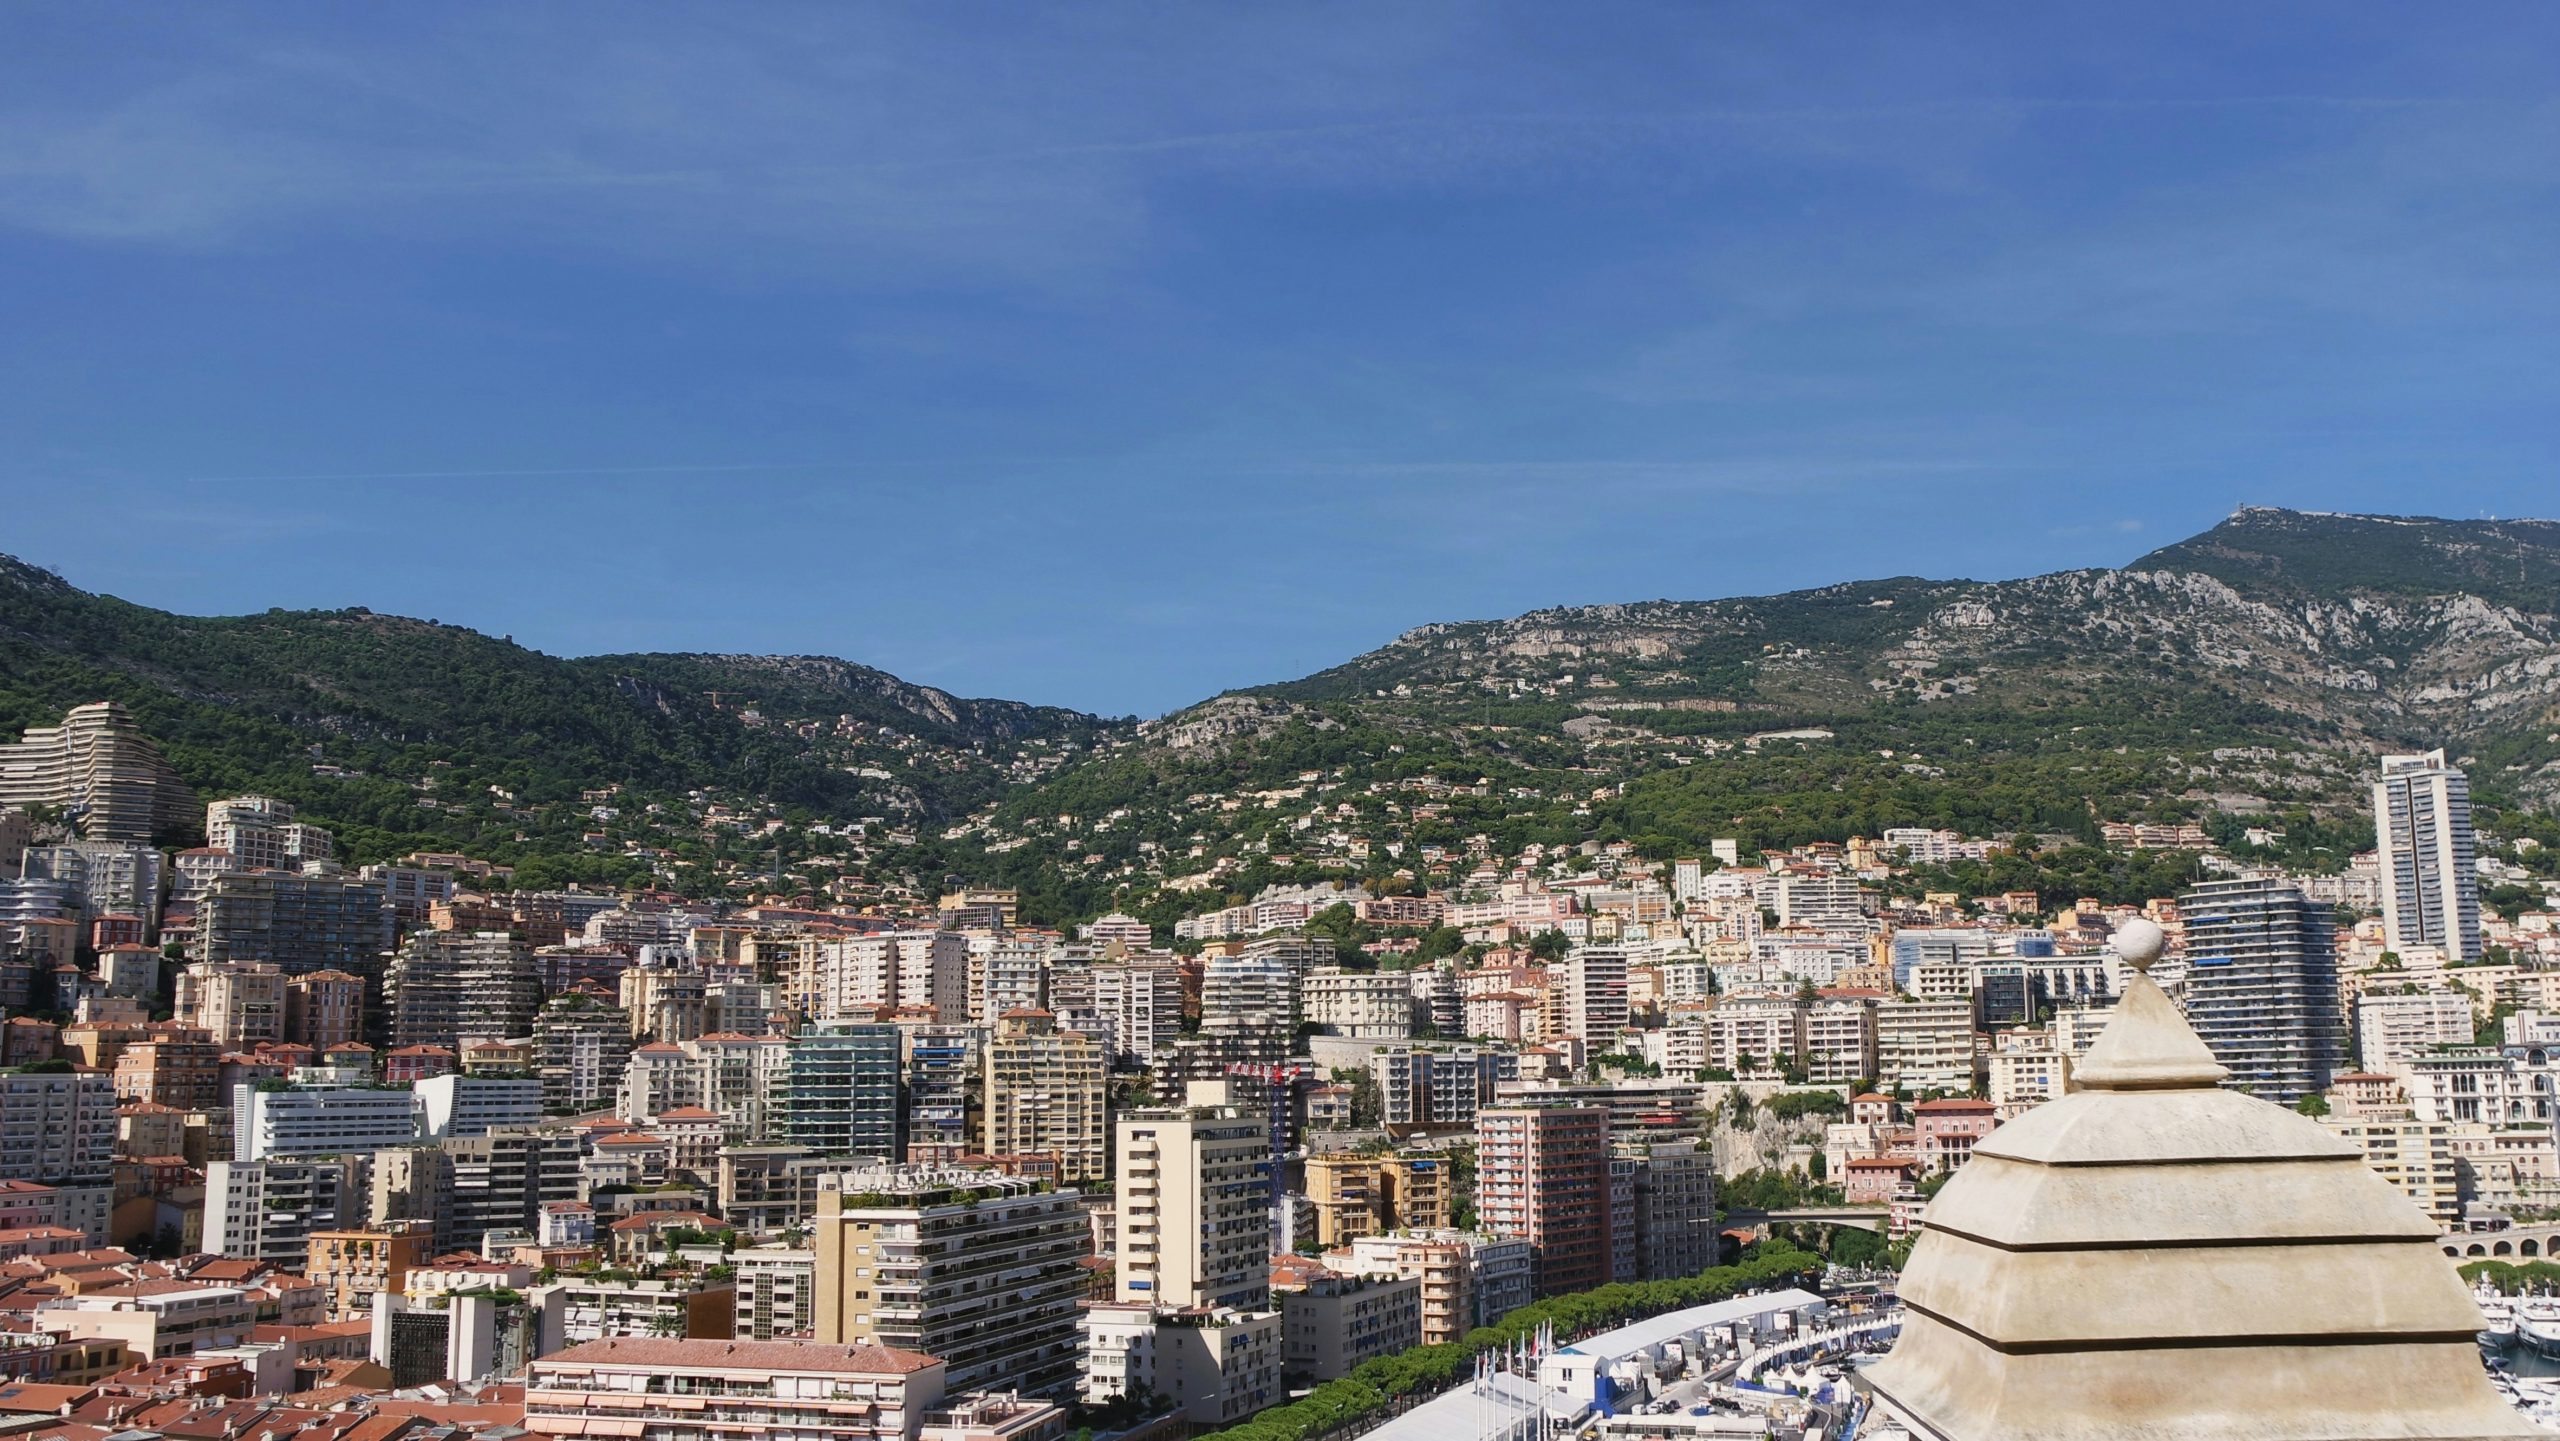 explore the beauty of monaco with a luxurious cruise experience. discover the stunning coastal views and glamorous lifestyle of monaco on a memorable cruise adventure.